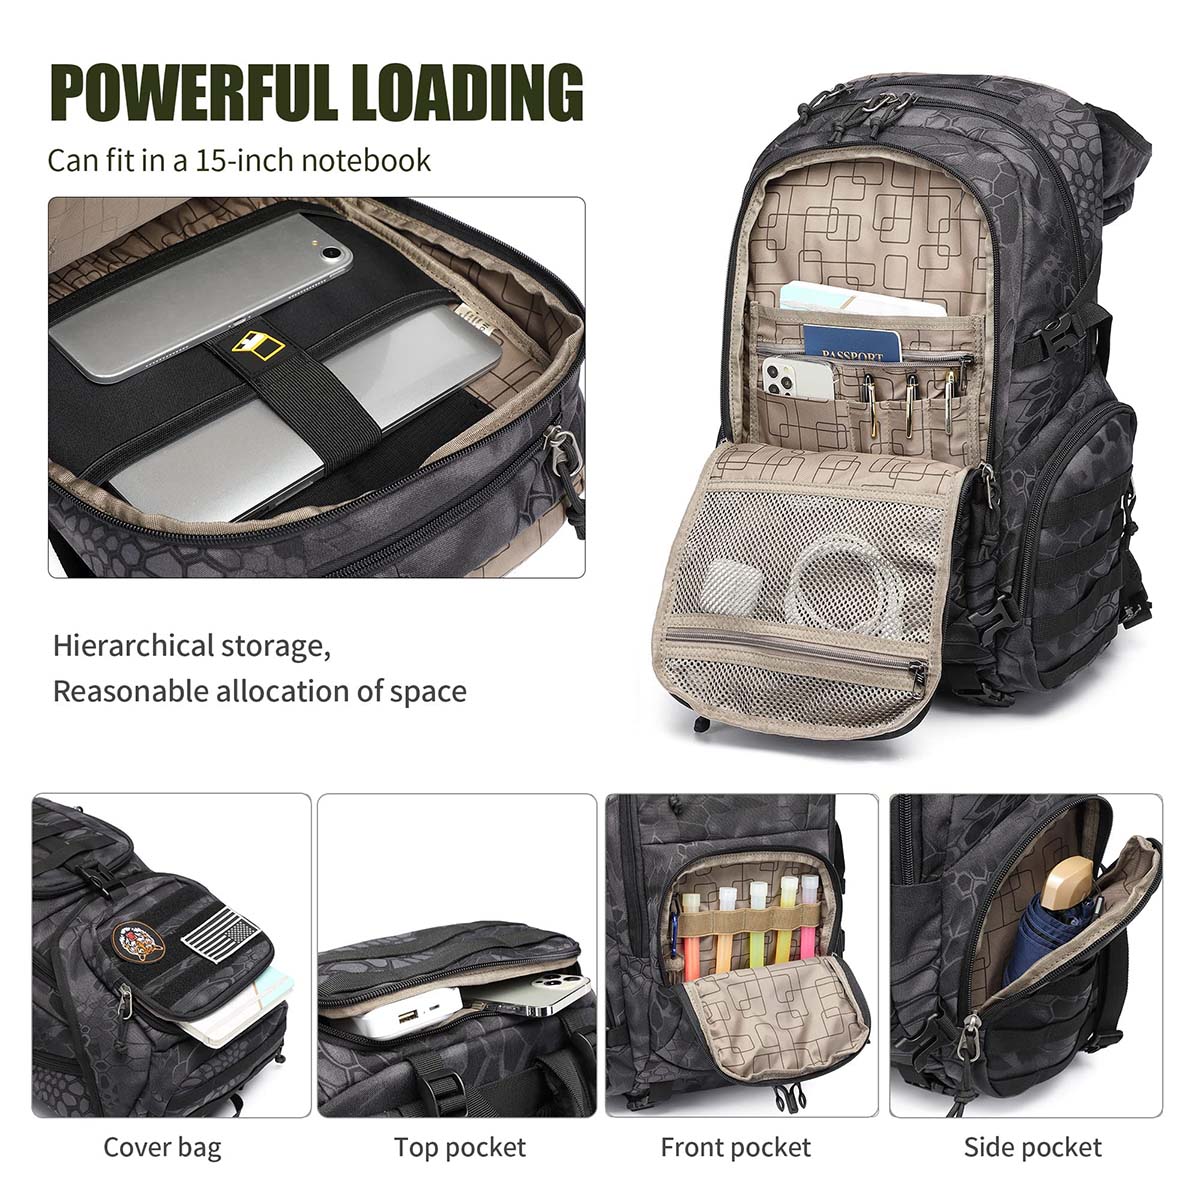 40L Military Tactical Backpack for Hiking Camping ,Molle System and ...